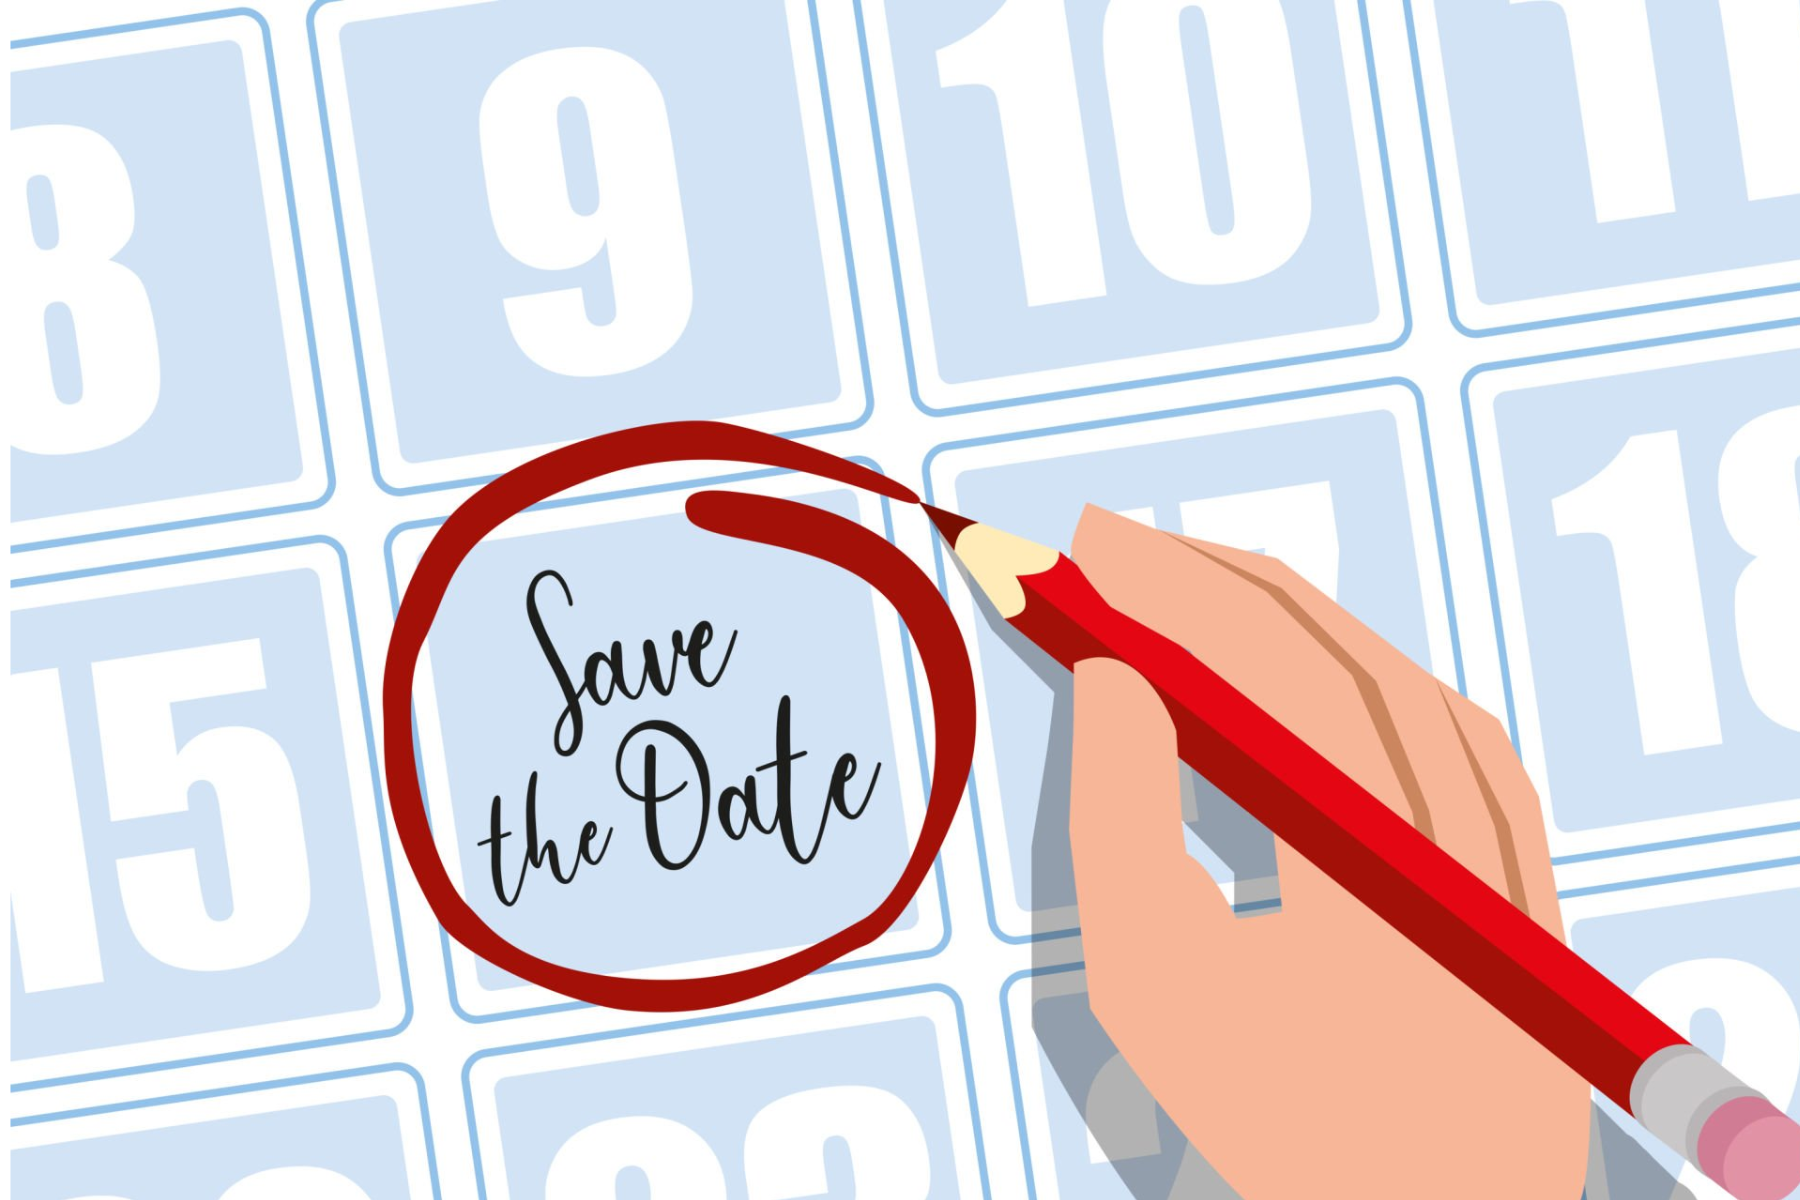 A white hand used a red pencil to mark a calendar with the text "save the date"